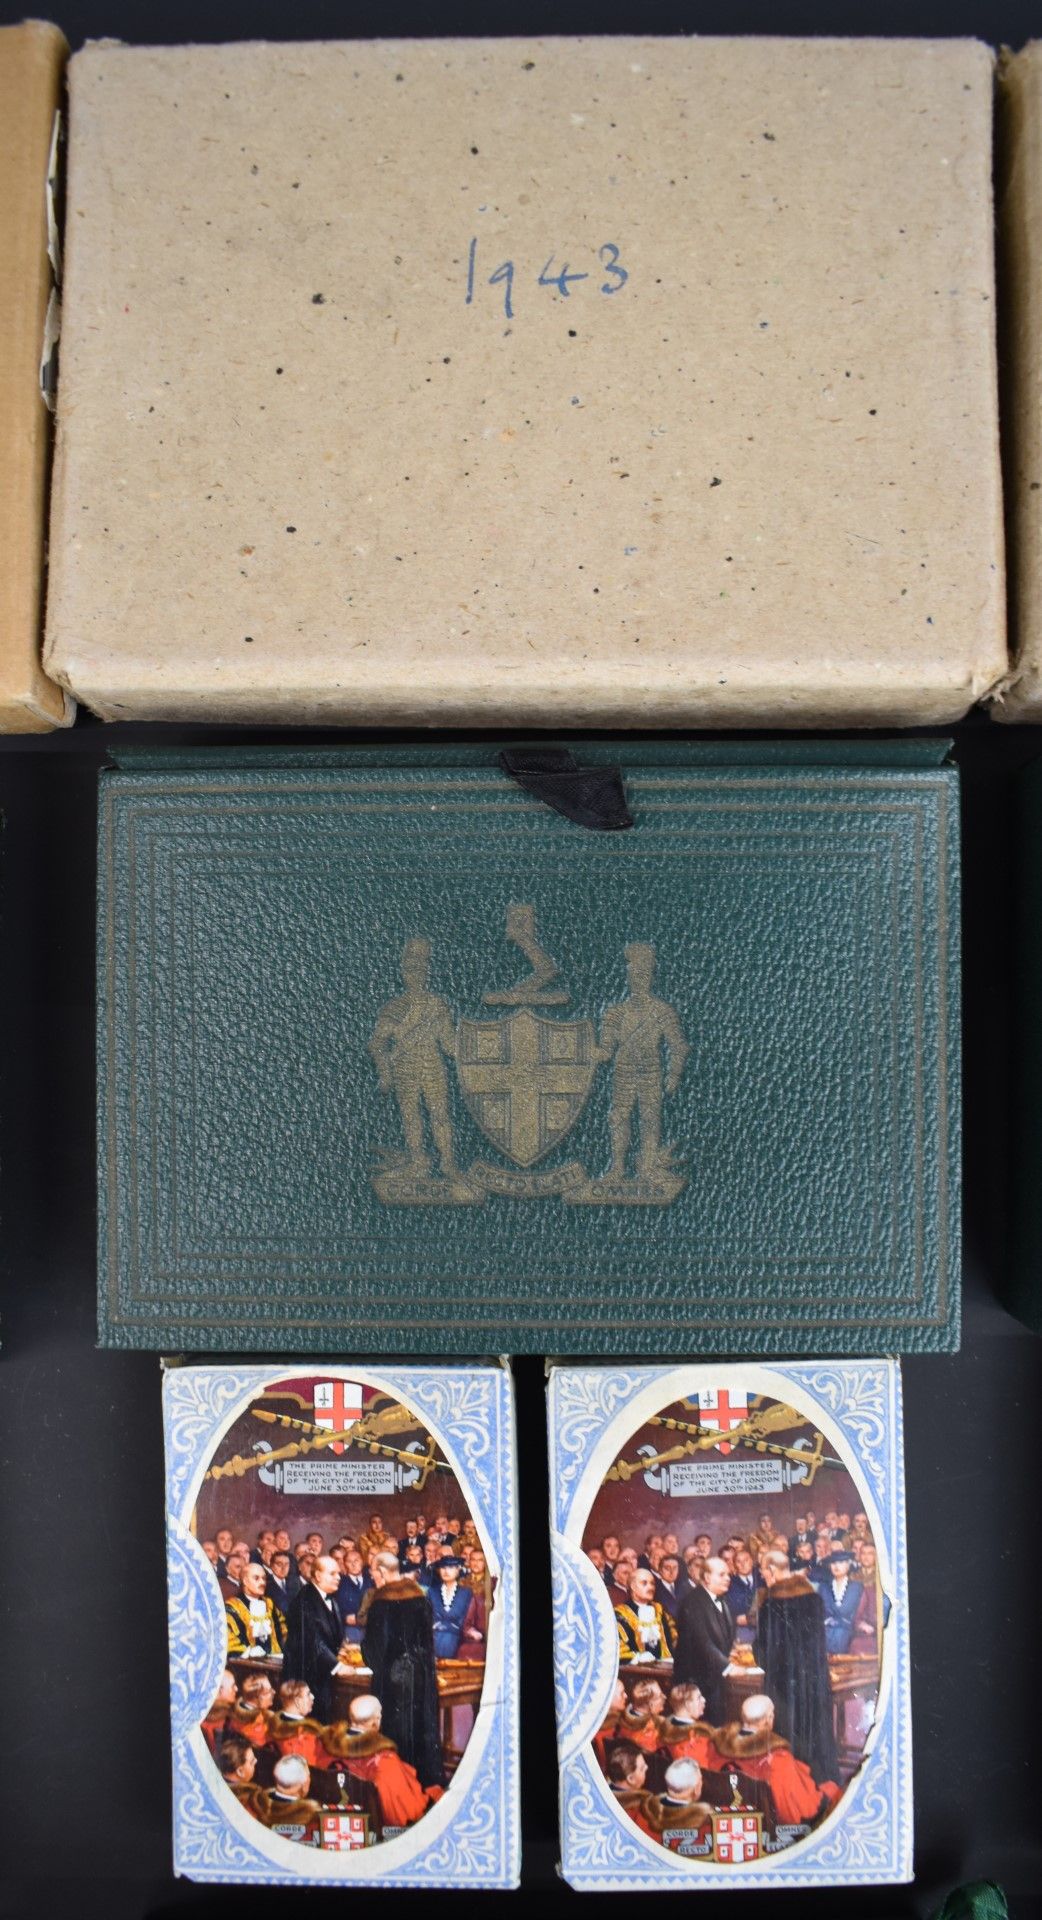 Thirteen packs of WW2 interest Worshipful Company of Makers of Playing Cards playing cards, - Image 3 of 7